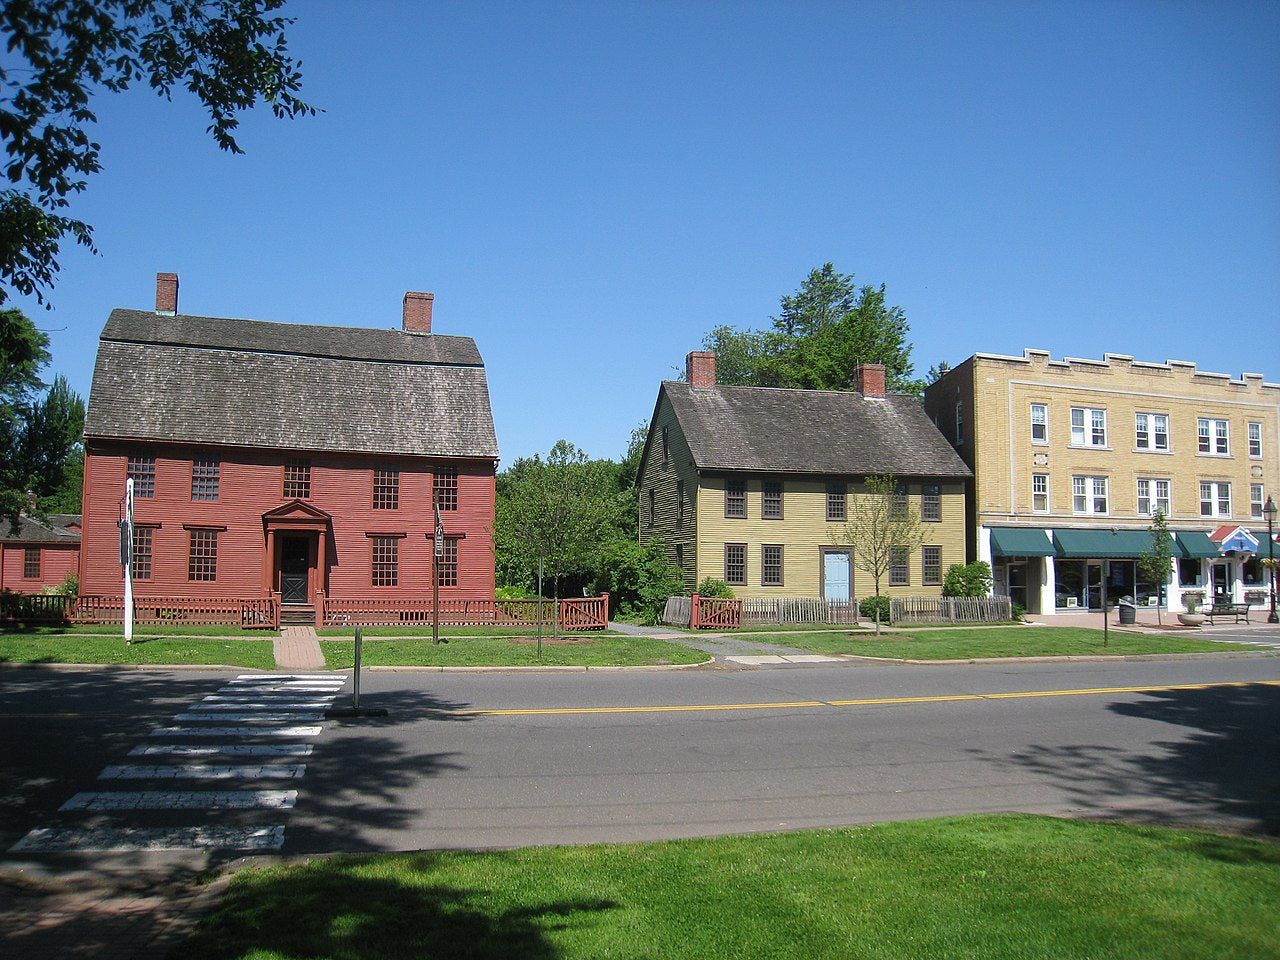 Haus and Hues in Wethersfield